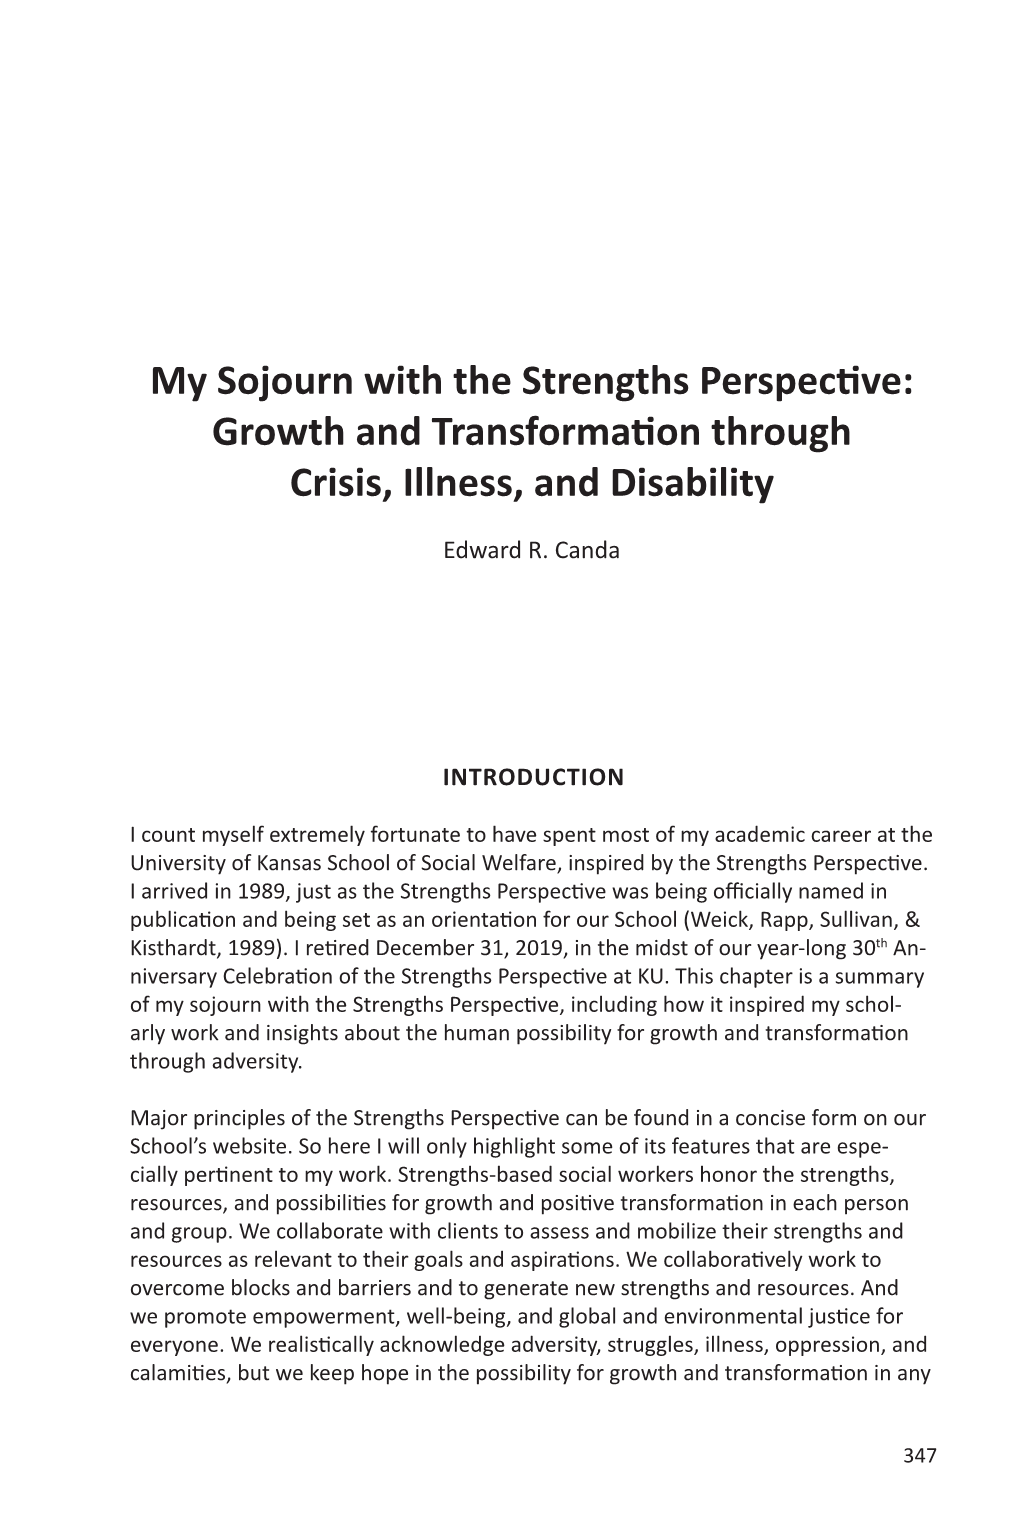 My Sojourn with the Strengths Perspective: Growth and Transformation Through Crisis, Illness, and Disability